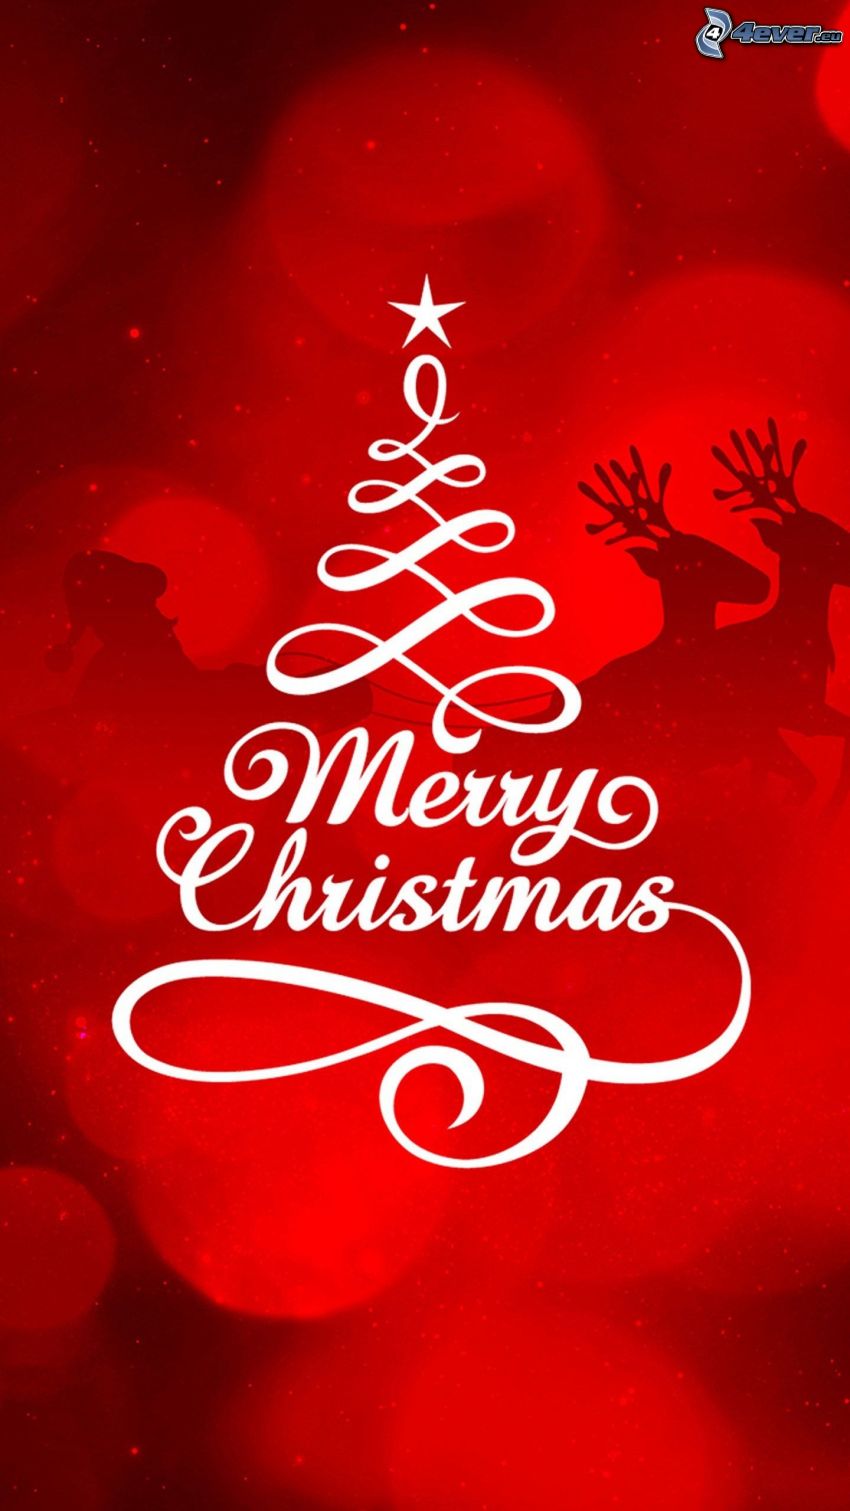 Merry Christmas, reindeers, sled, Santa Claus, silhouette, christmas tree, red background